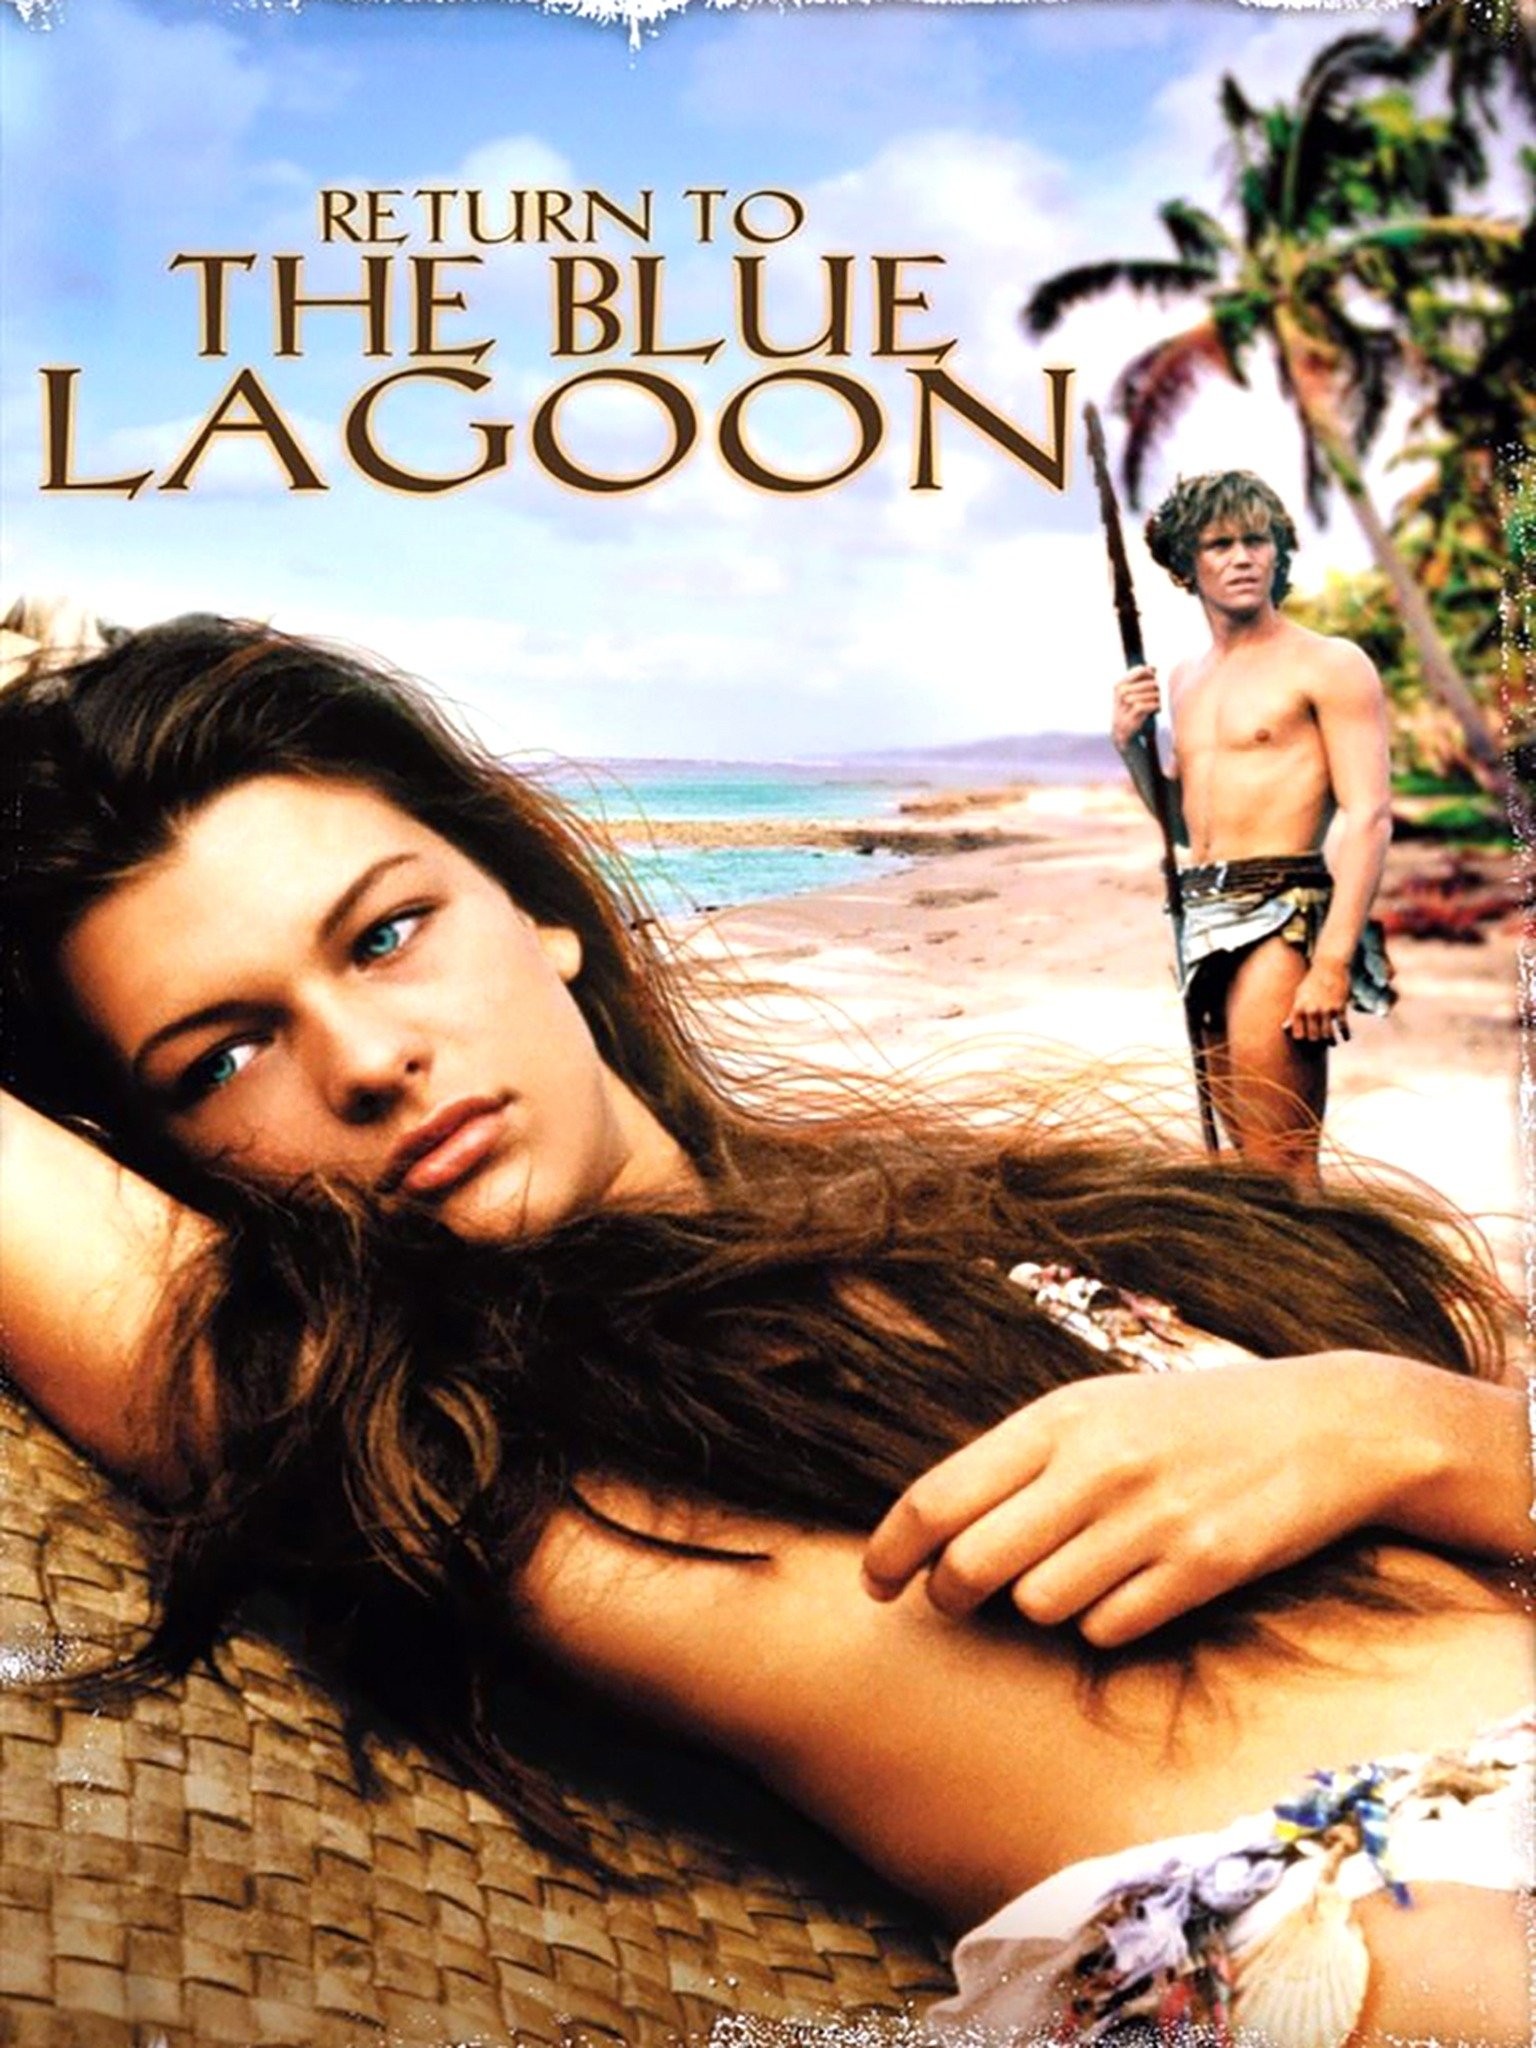 antoinette blunt mays recommends blue lagoon movie download pic